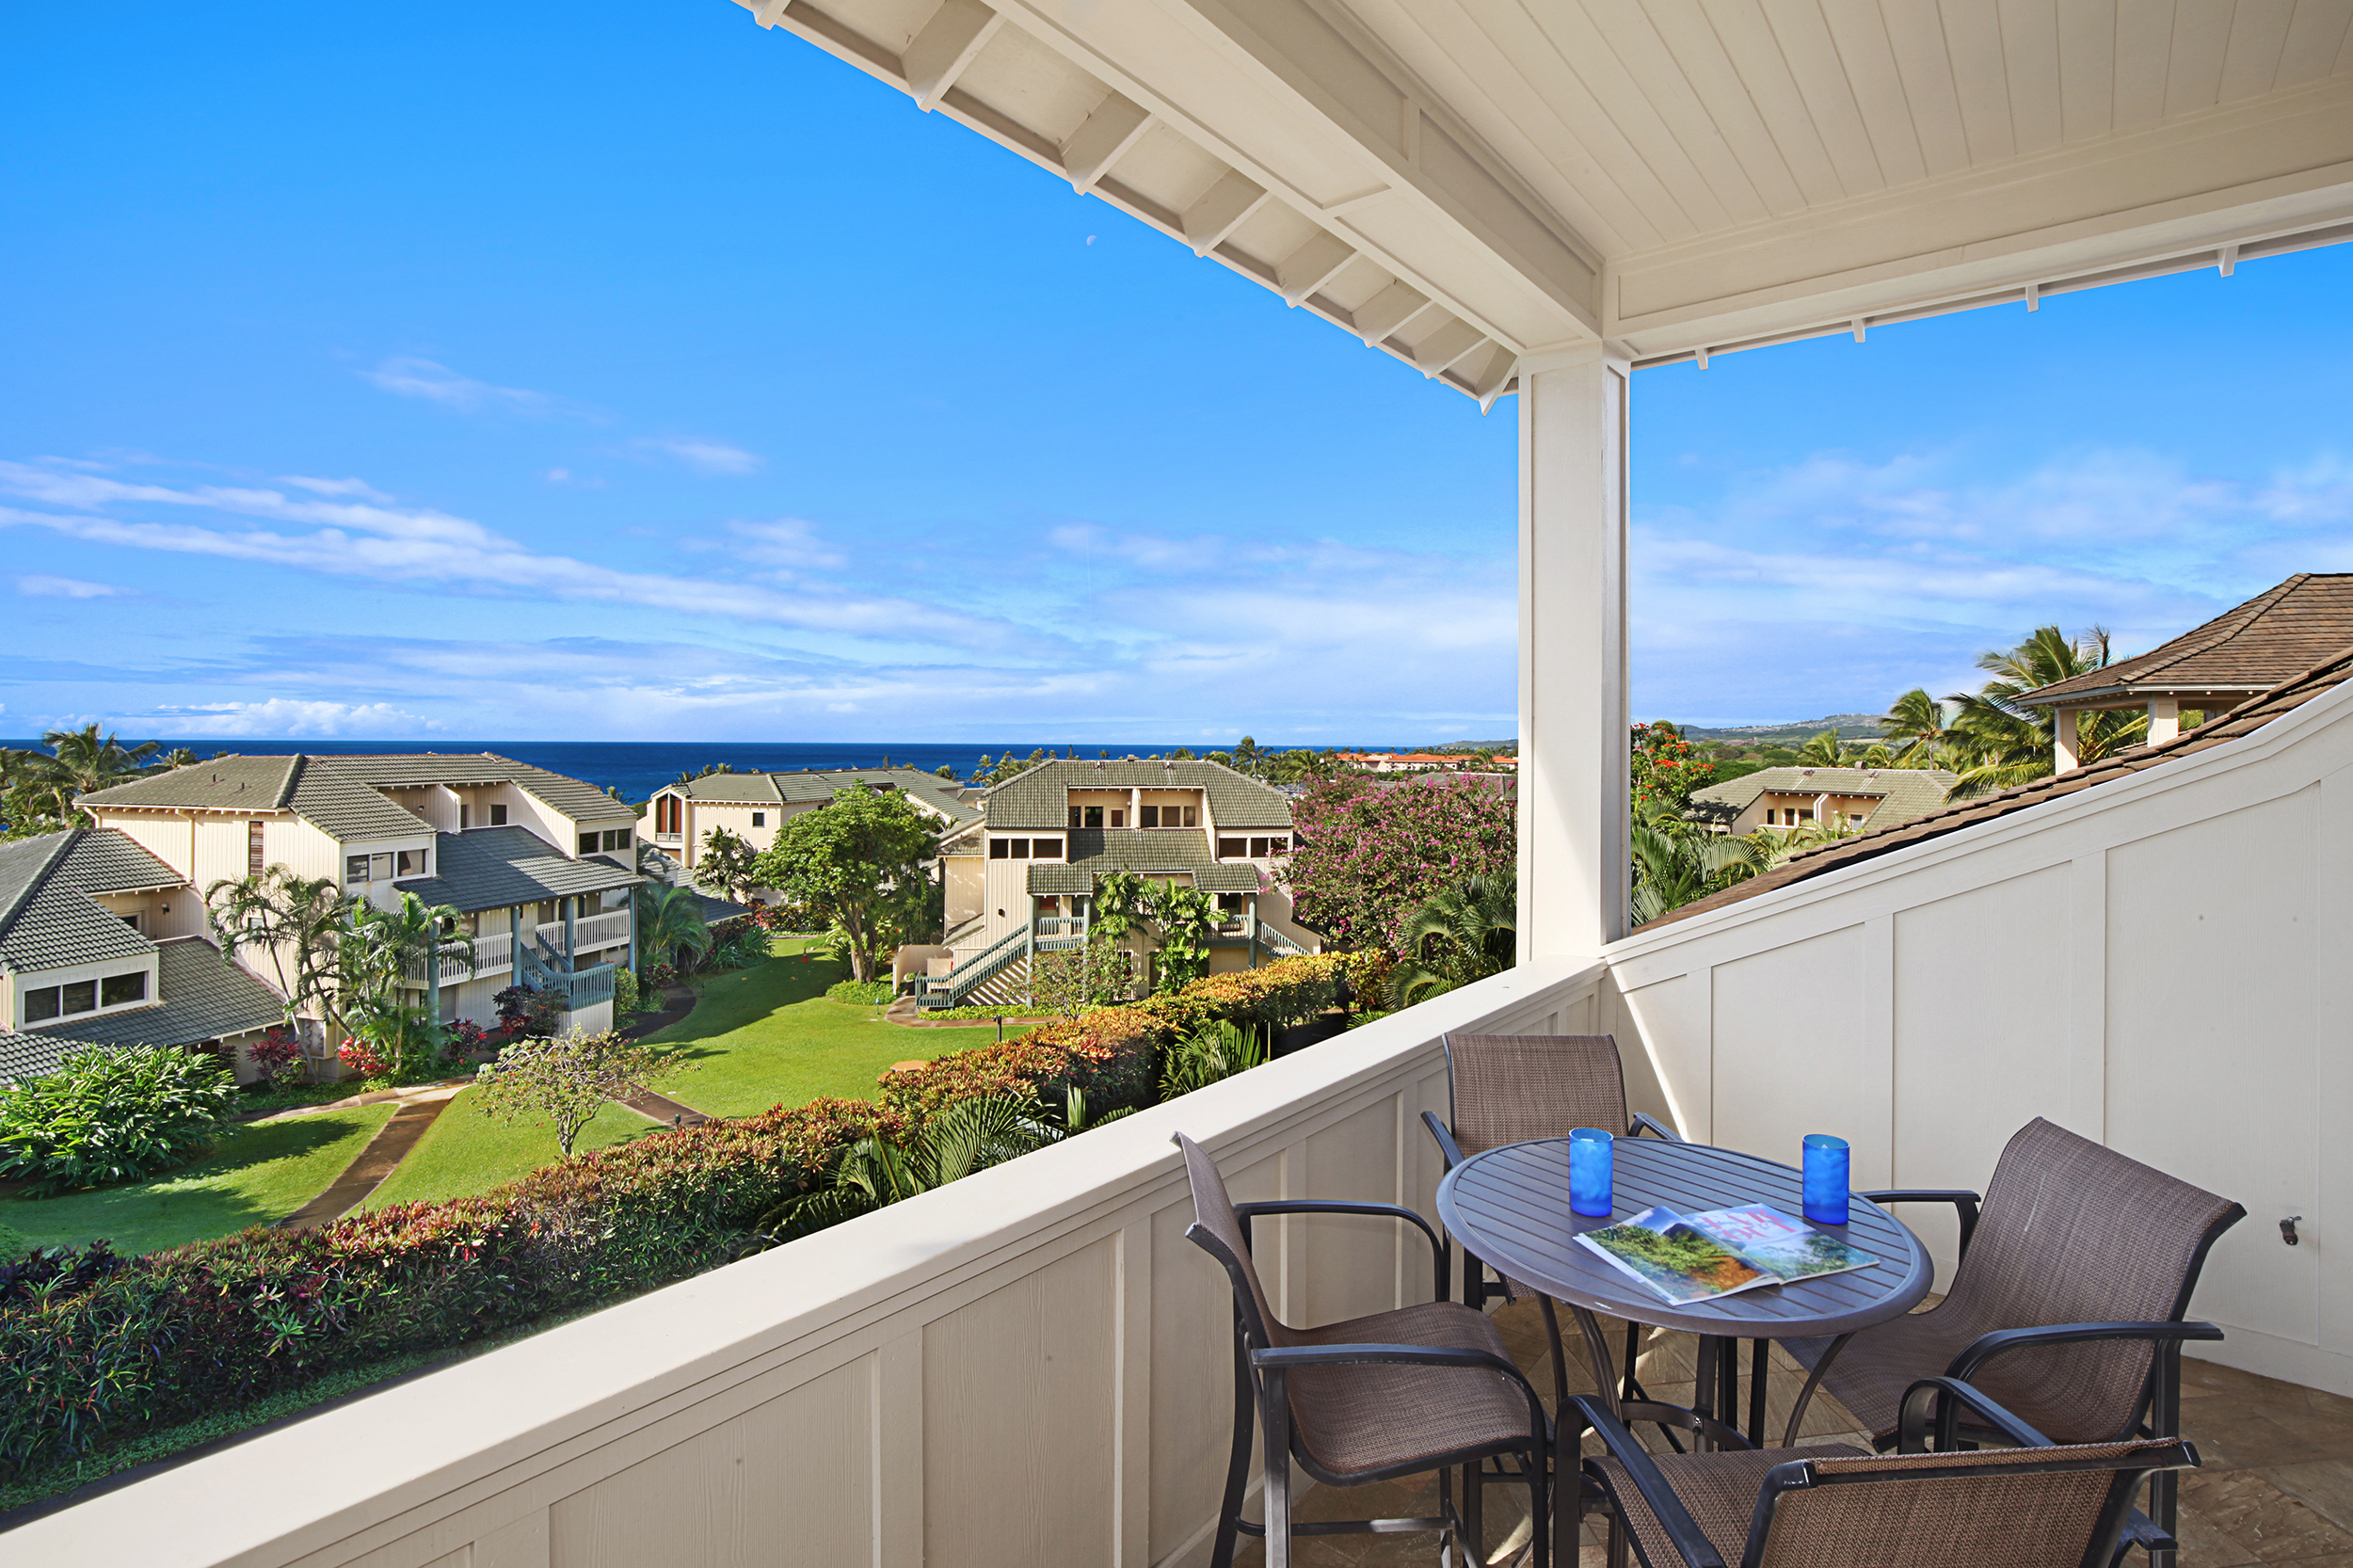 Island views from your private lanai.